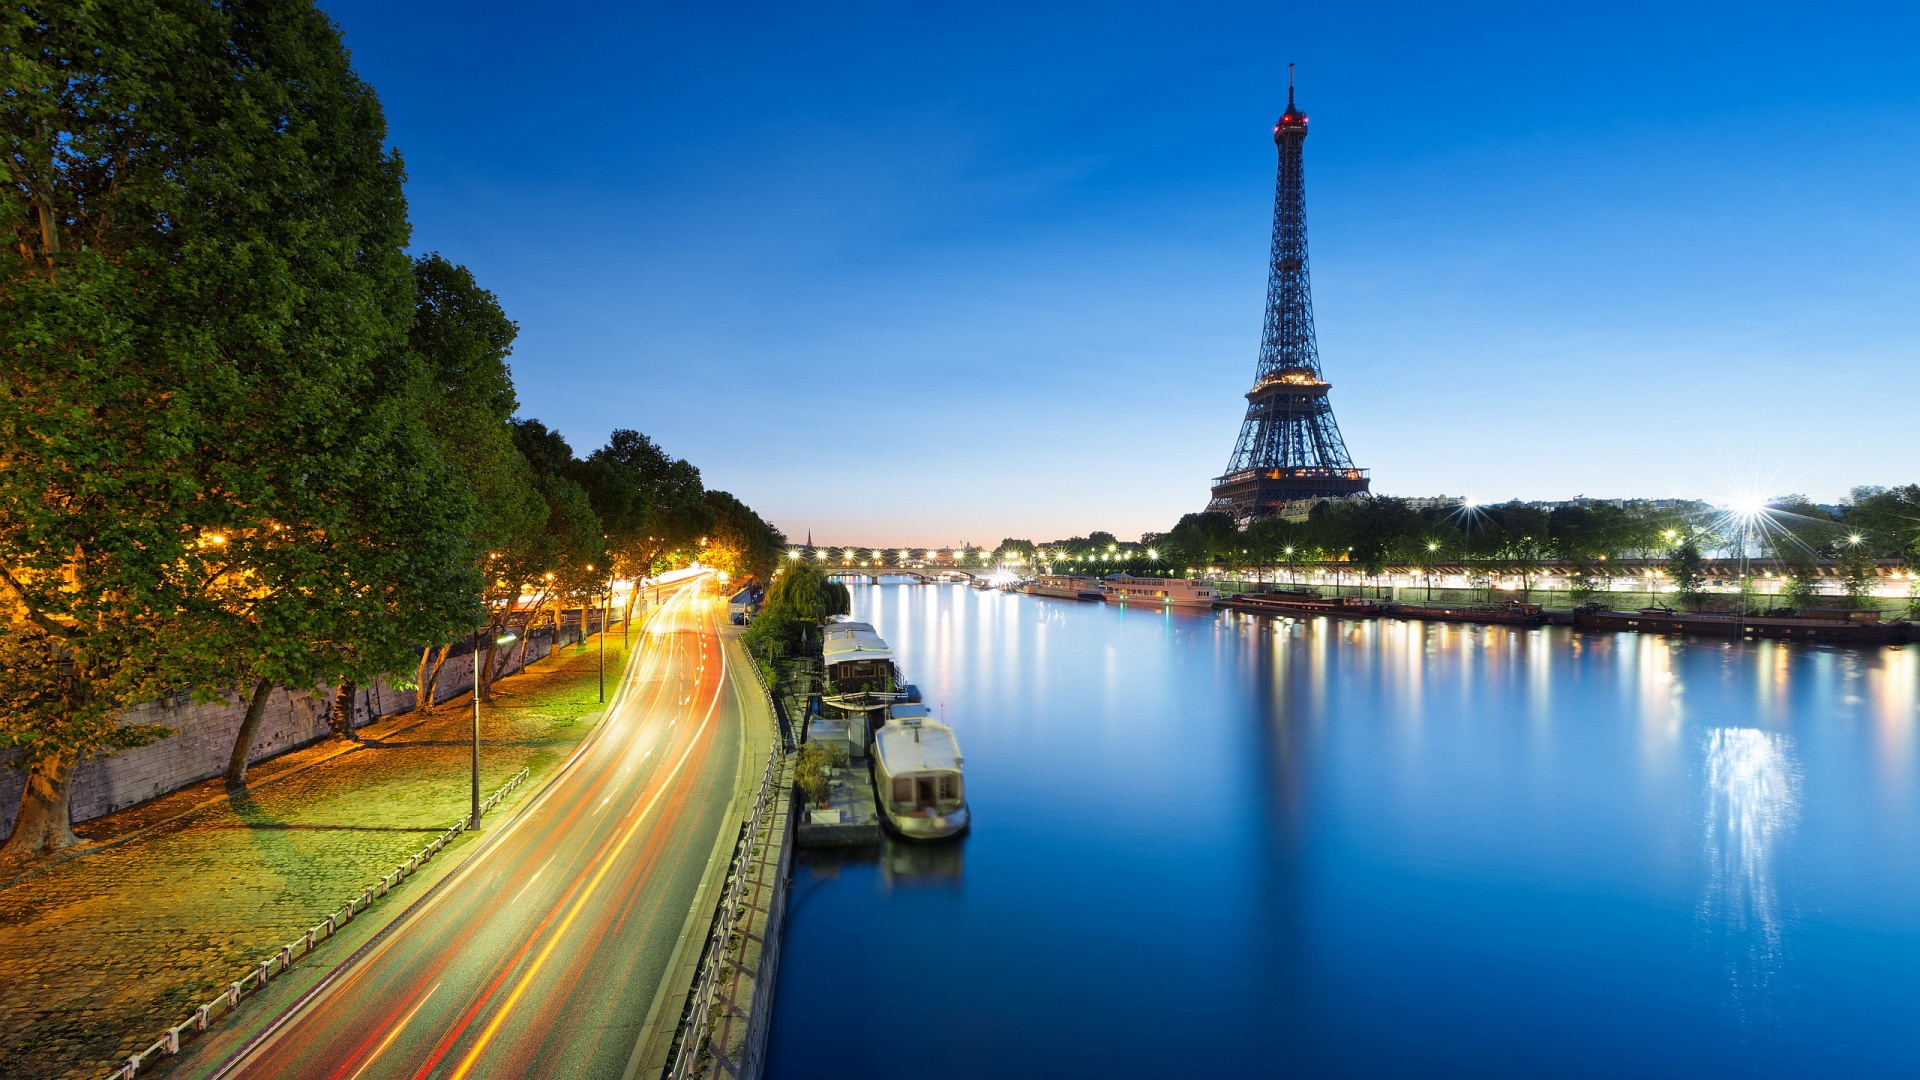 HD Paris Background The City Of Lights And Romance